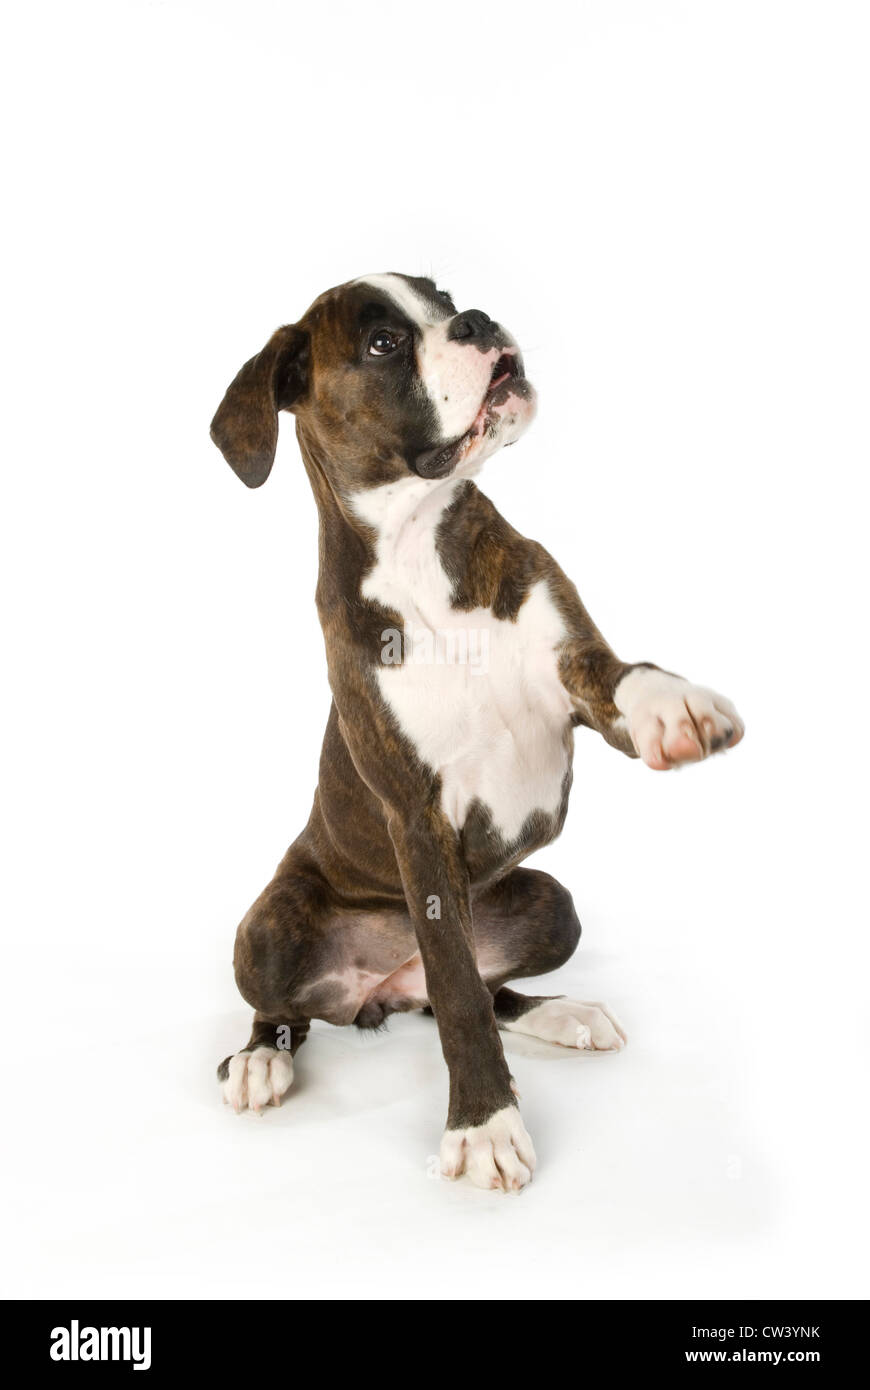 Boxer. Juvenile dog sitting with one paw lifted up. Studio picture against  a white background Stock Photo - Alamy